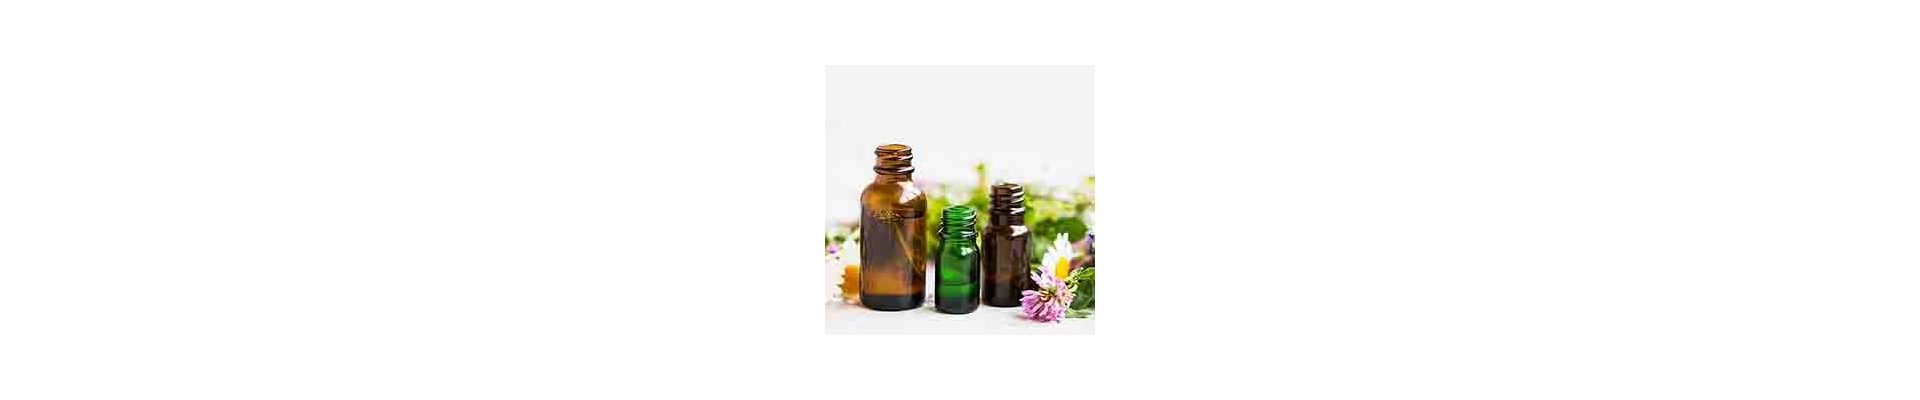 Natural Essential Oils For Soap & Cosmetics | The Soap Kitchen™